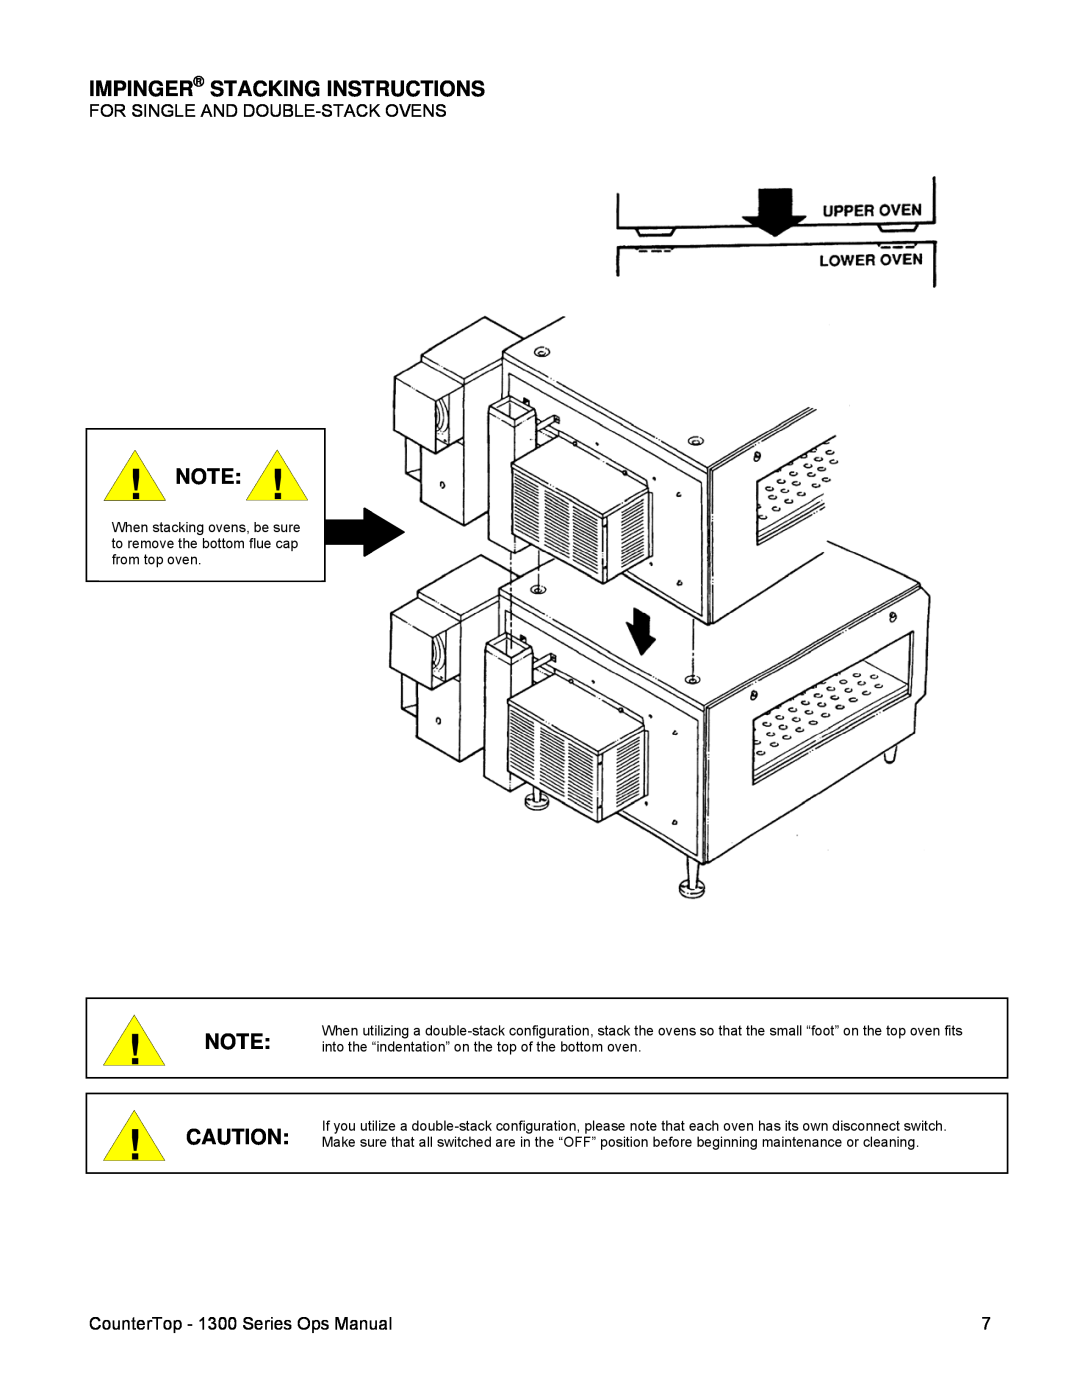 Lincoln Impinger Stacking Instructions, For Single And Double-Stackovens, CounterTop - 1300 Series Ops Manual 